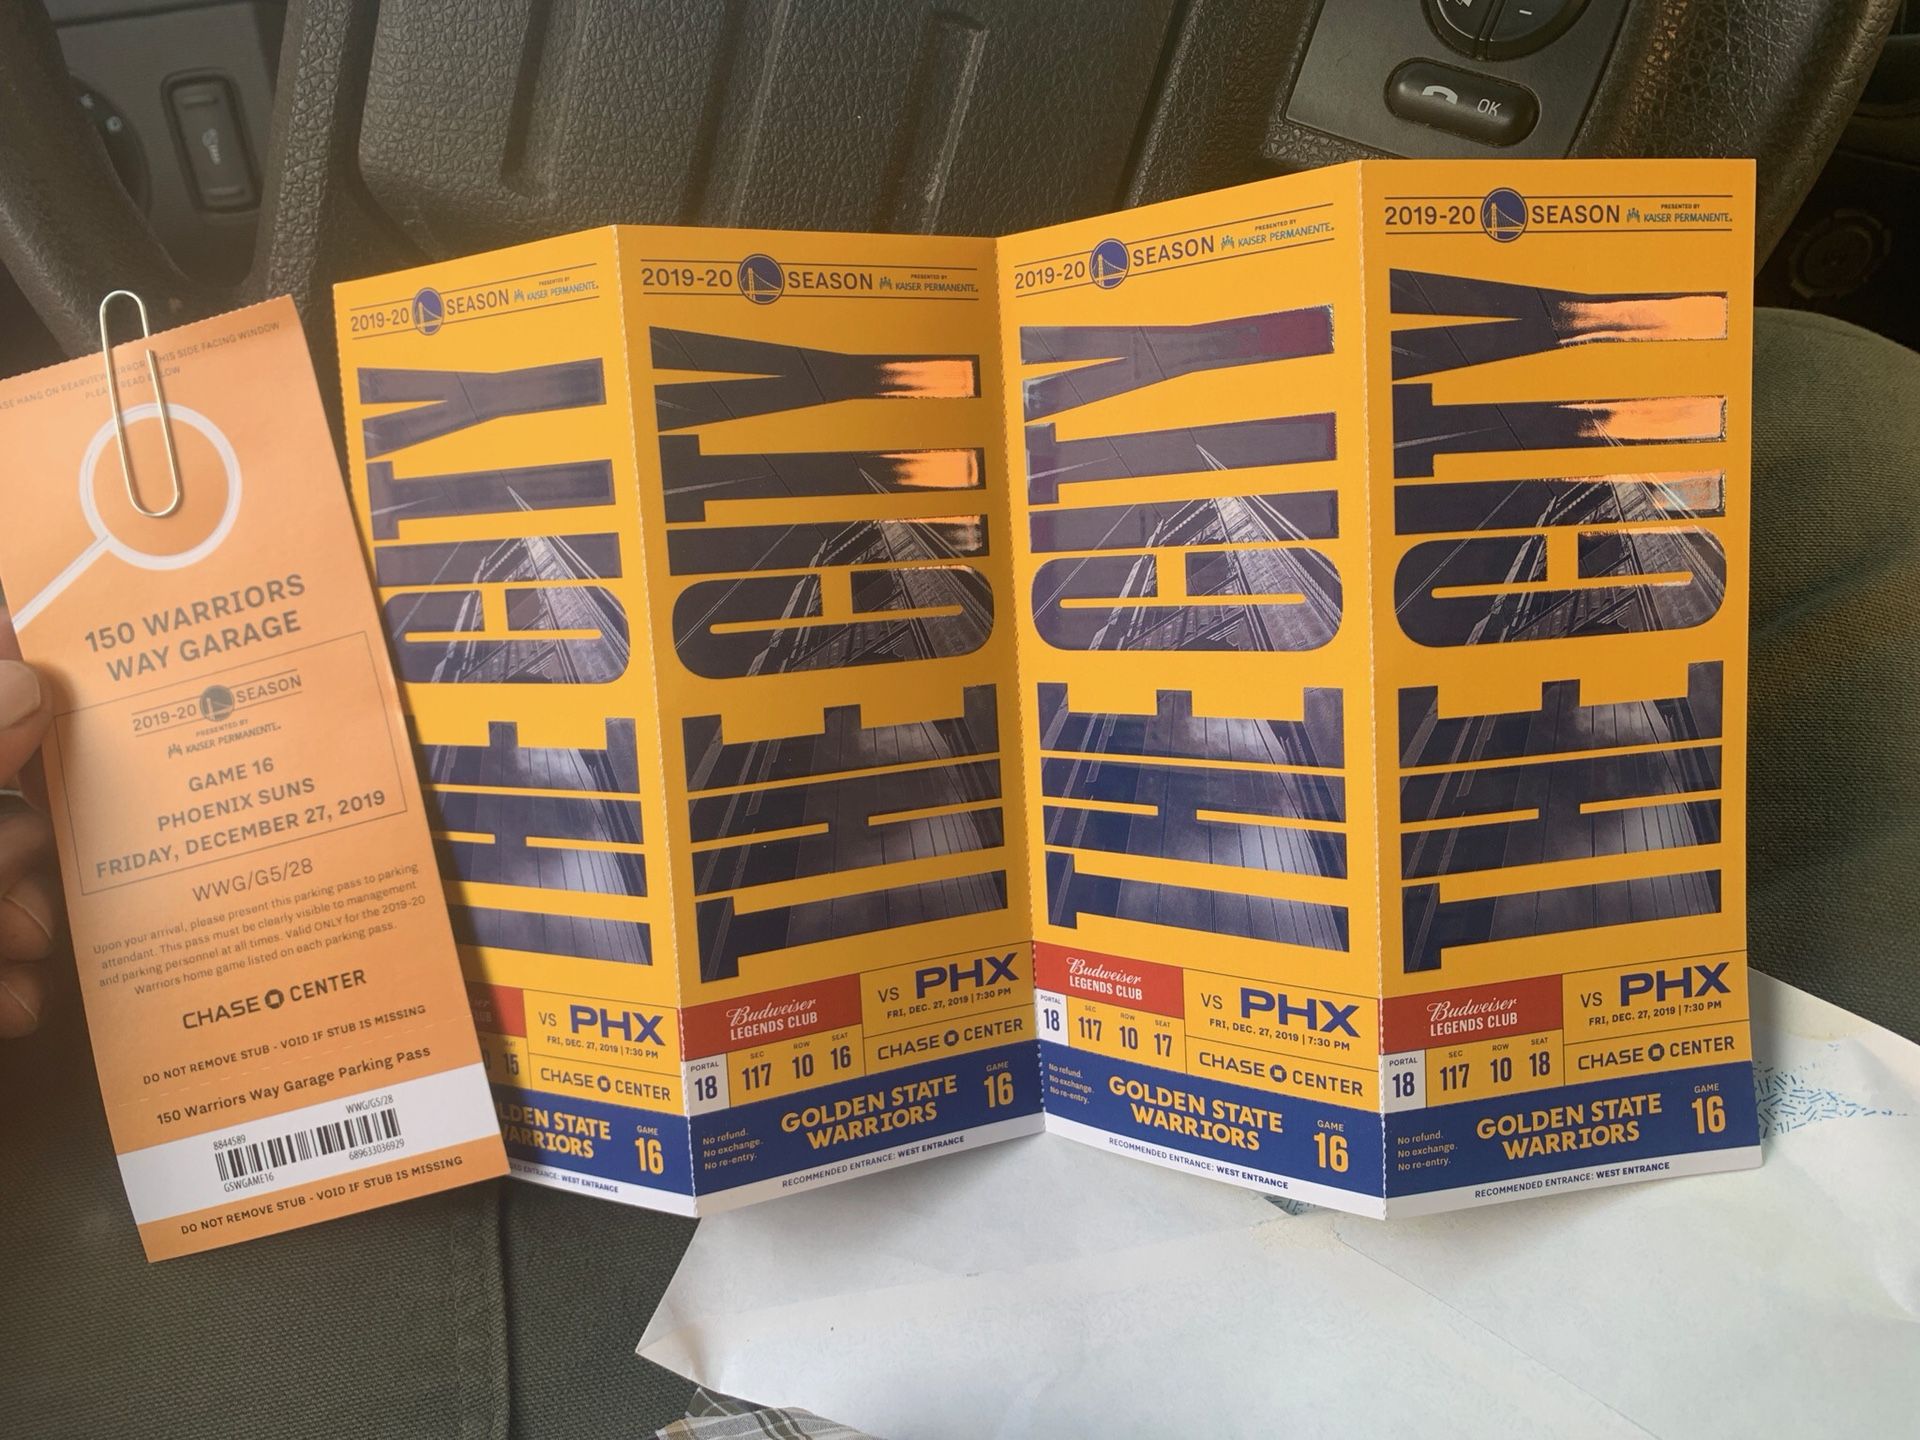 Tickets and parking pass Warriors game 12/27